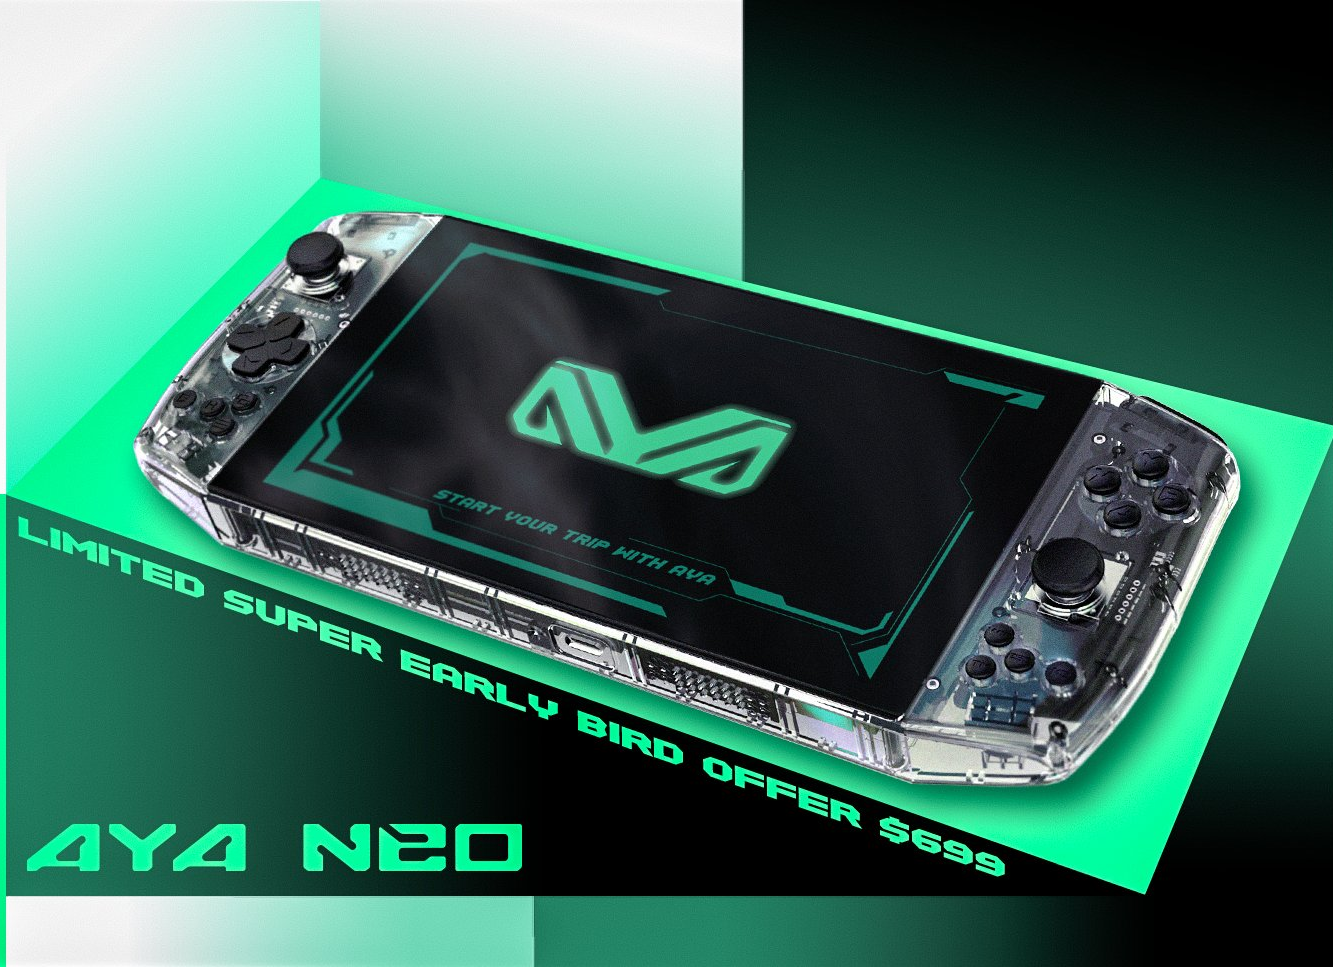 Aya Neo Founder launched, a handheld gaming console with AMD Ryzen